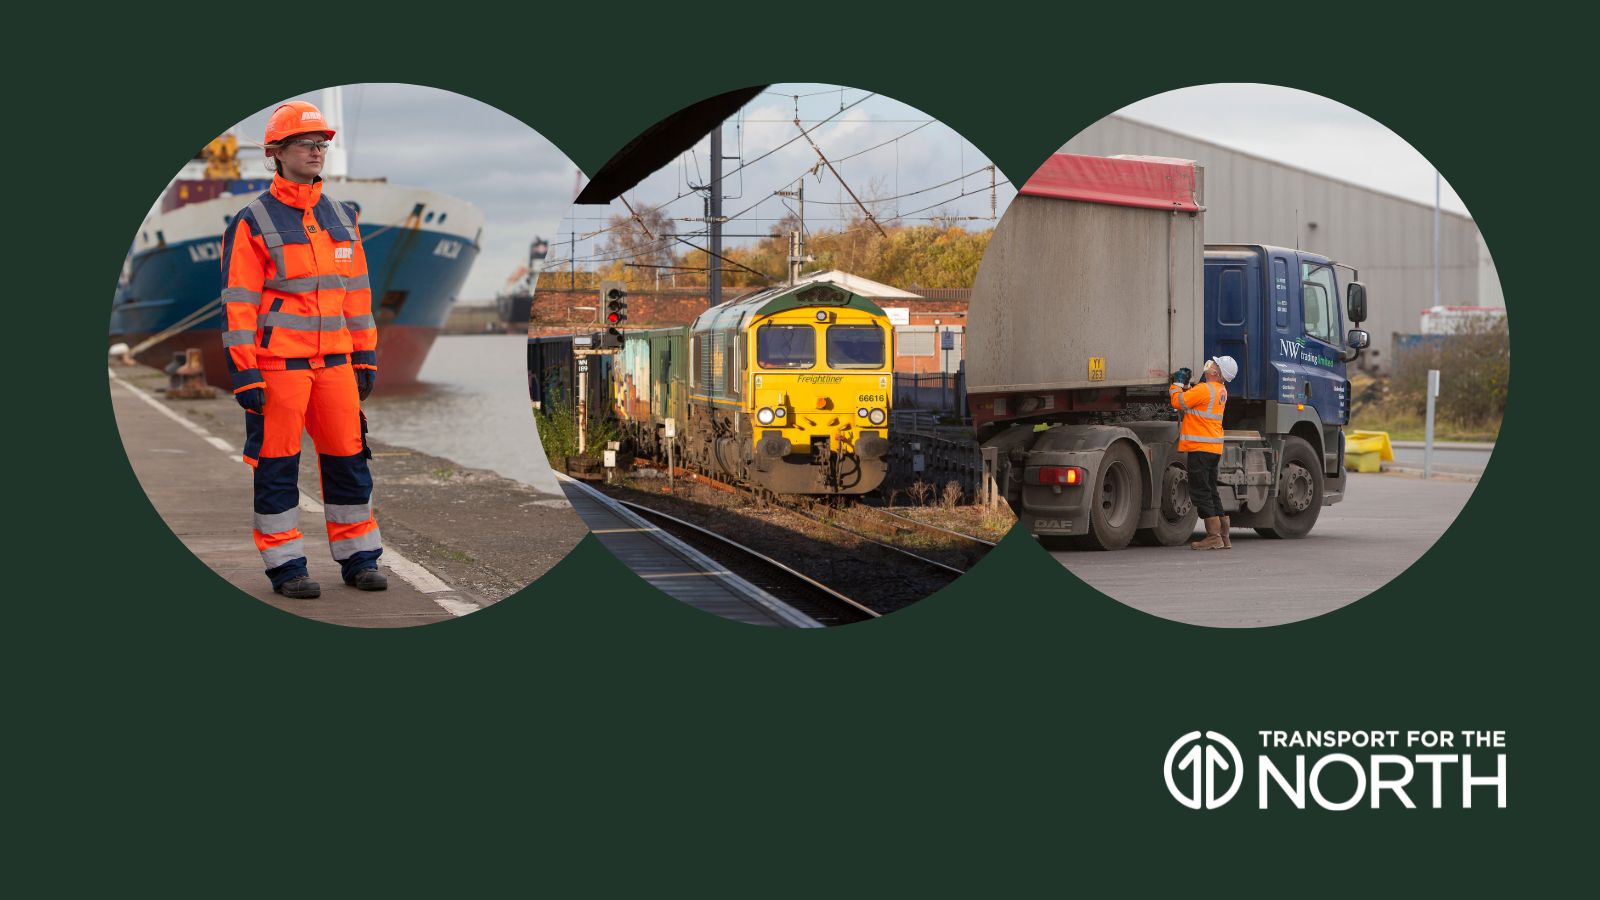 Hull Freight Terminal Worker, Freightliner train, lorry leaving depot